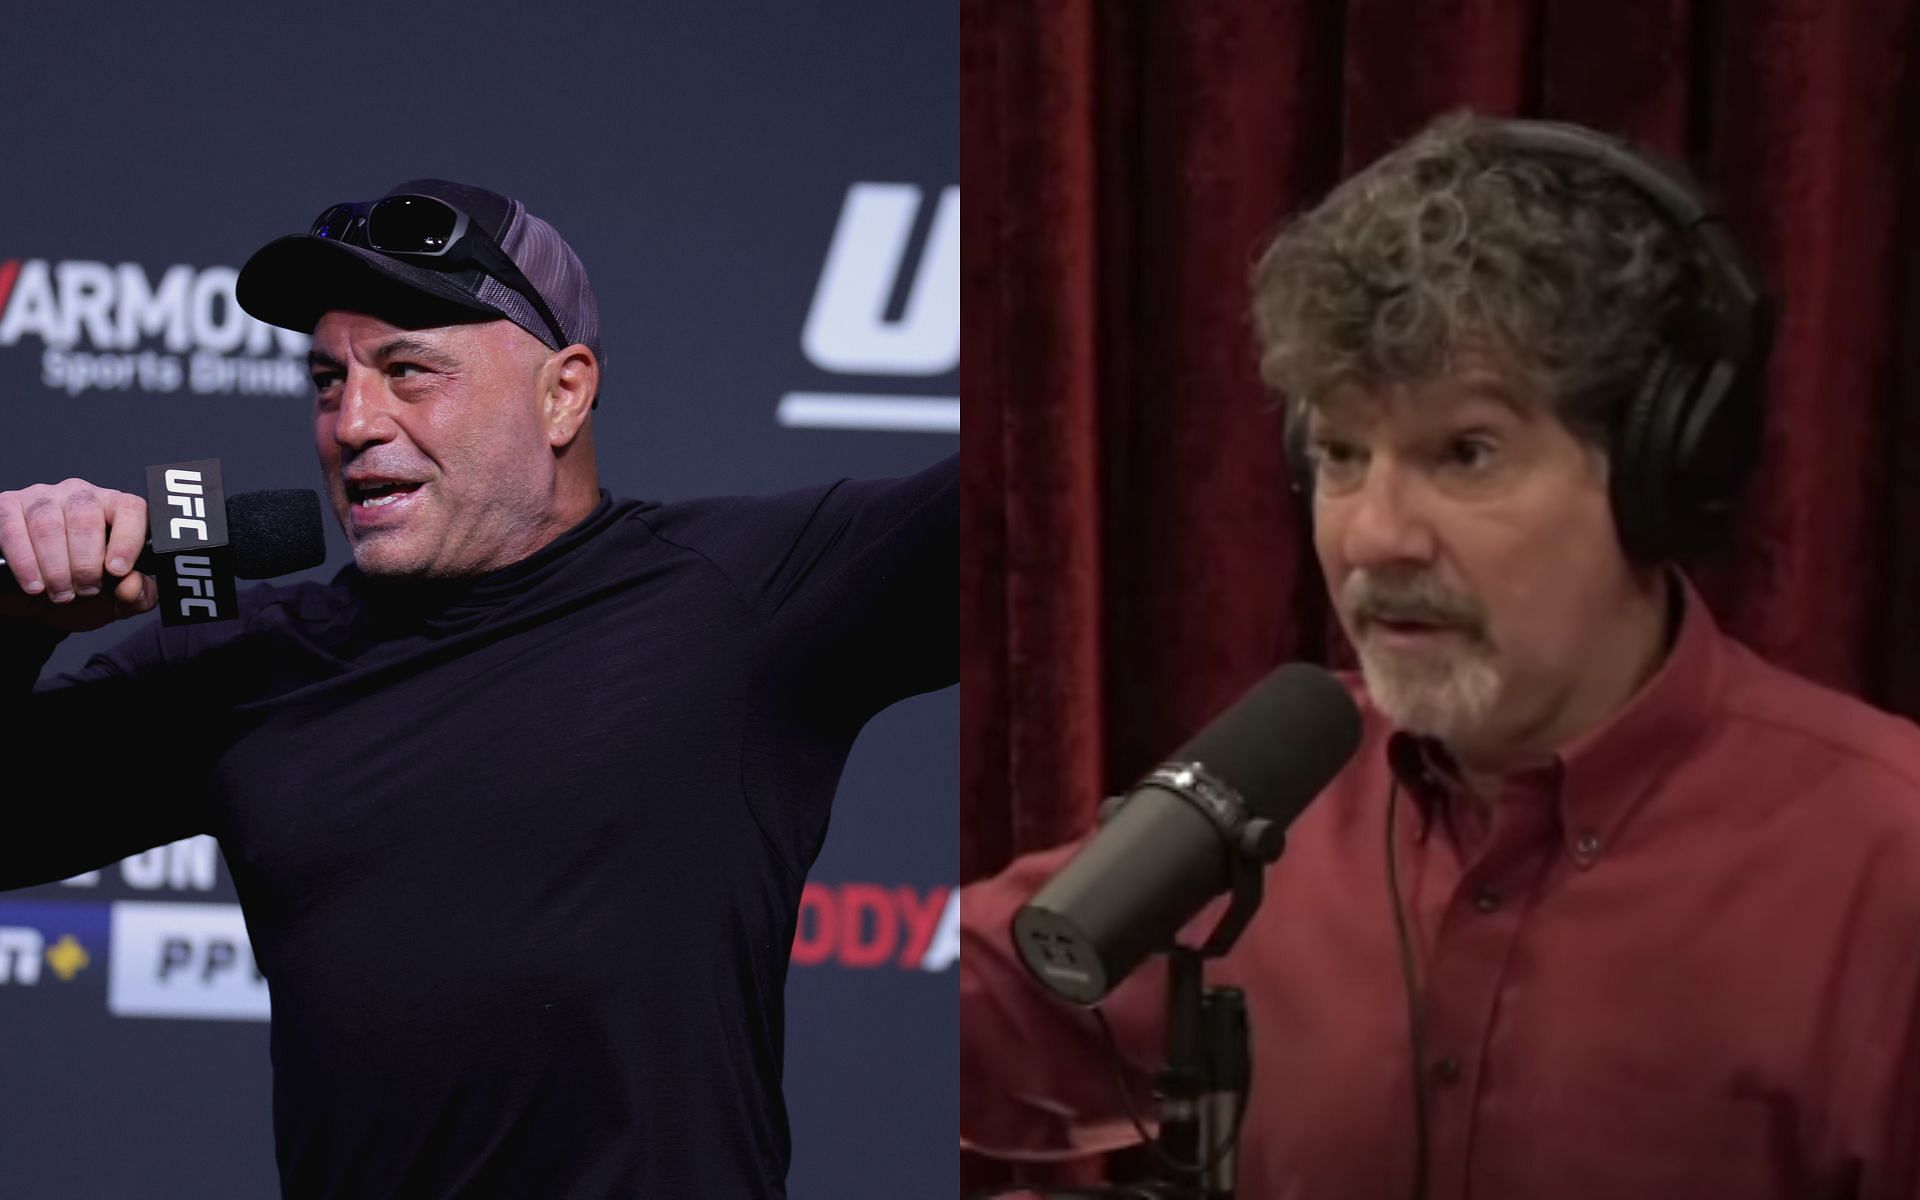 Joe Rogan (left) and Bret Weinstein (right) (Image credits Getty Images and PowerfulJRE on YouTube)